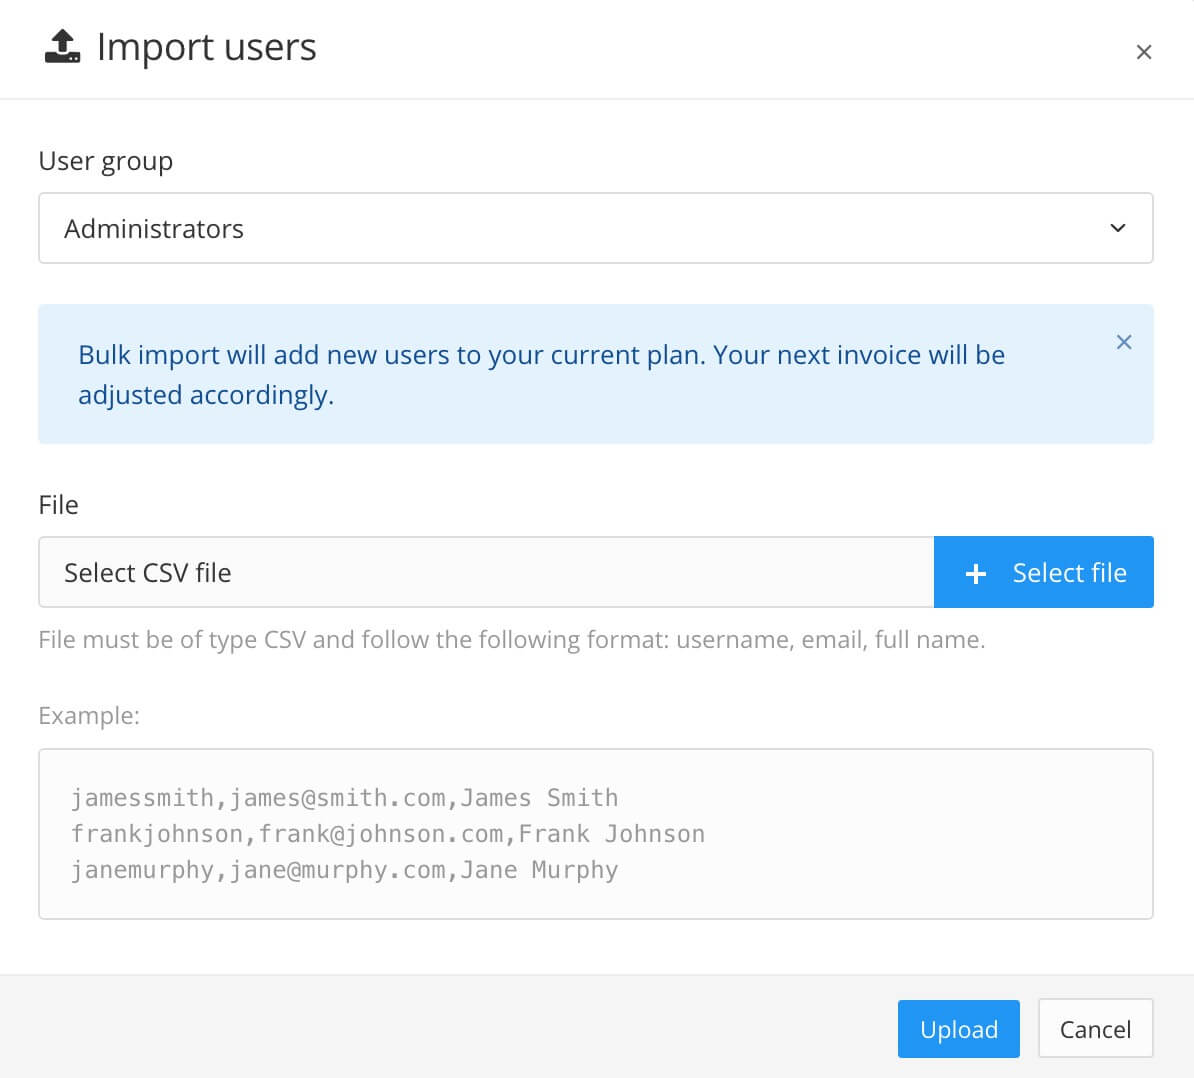 Import users dialog. There are fields for selecting the user type and uploading your CSV file